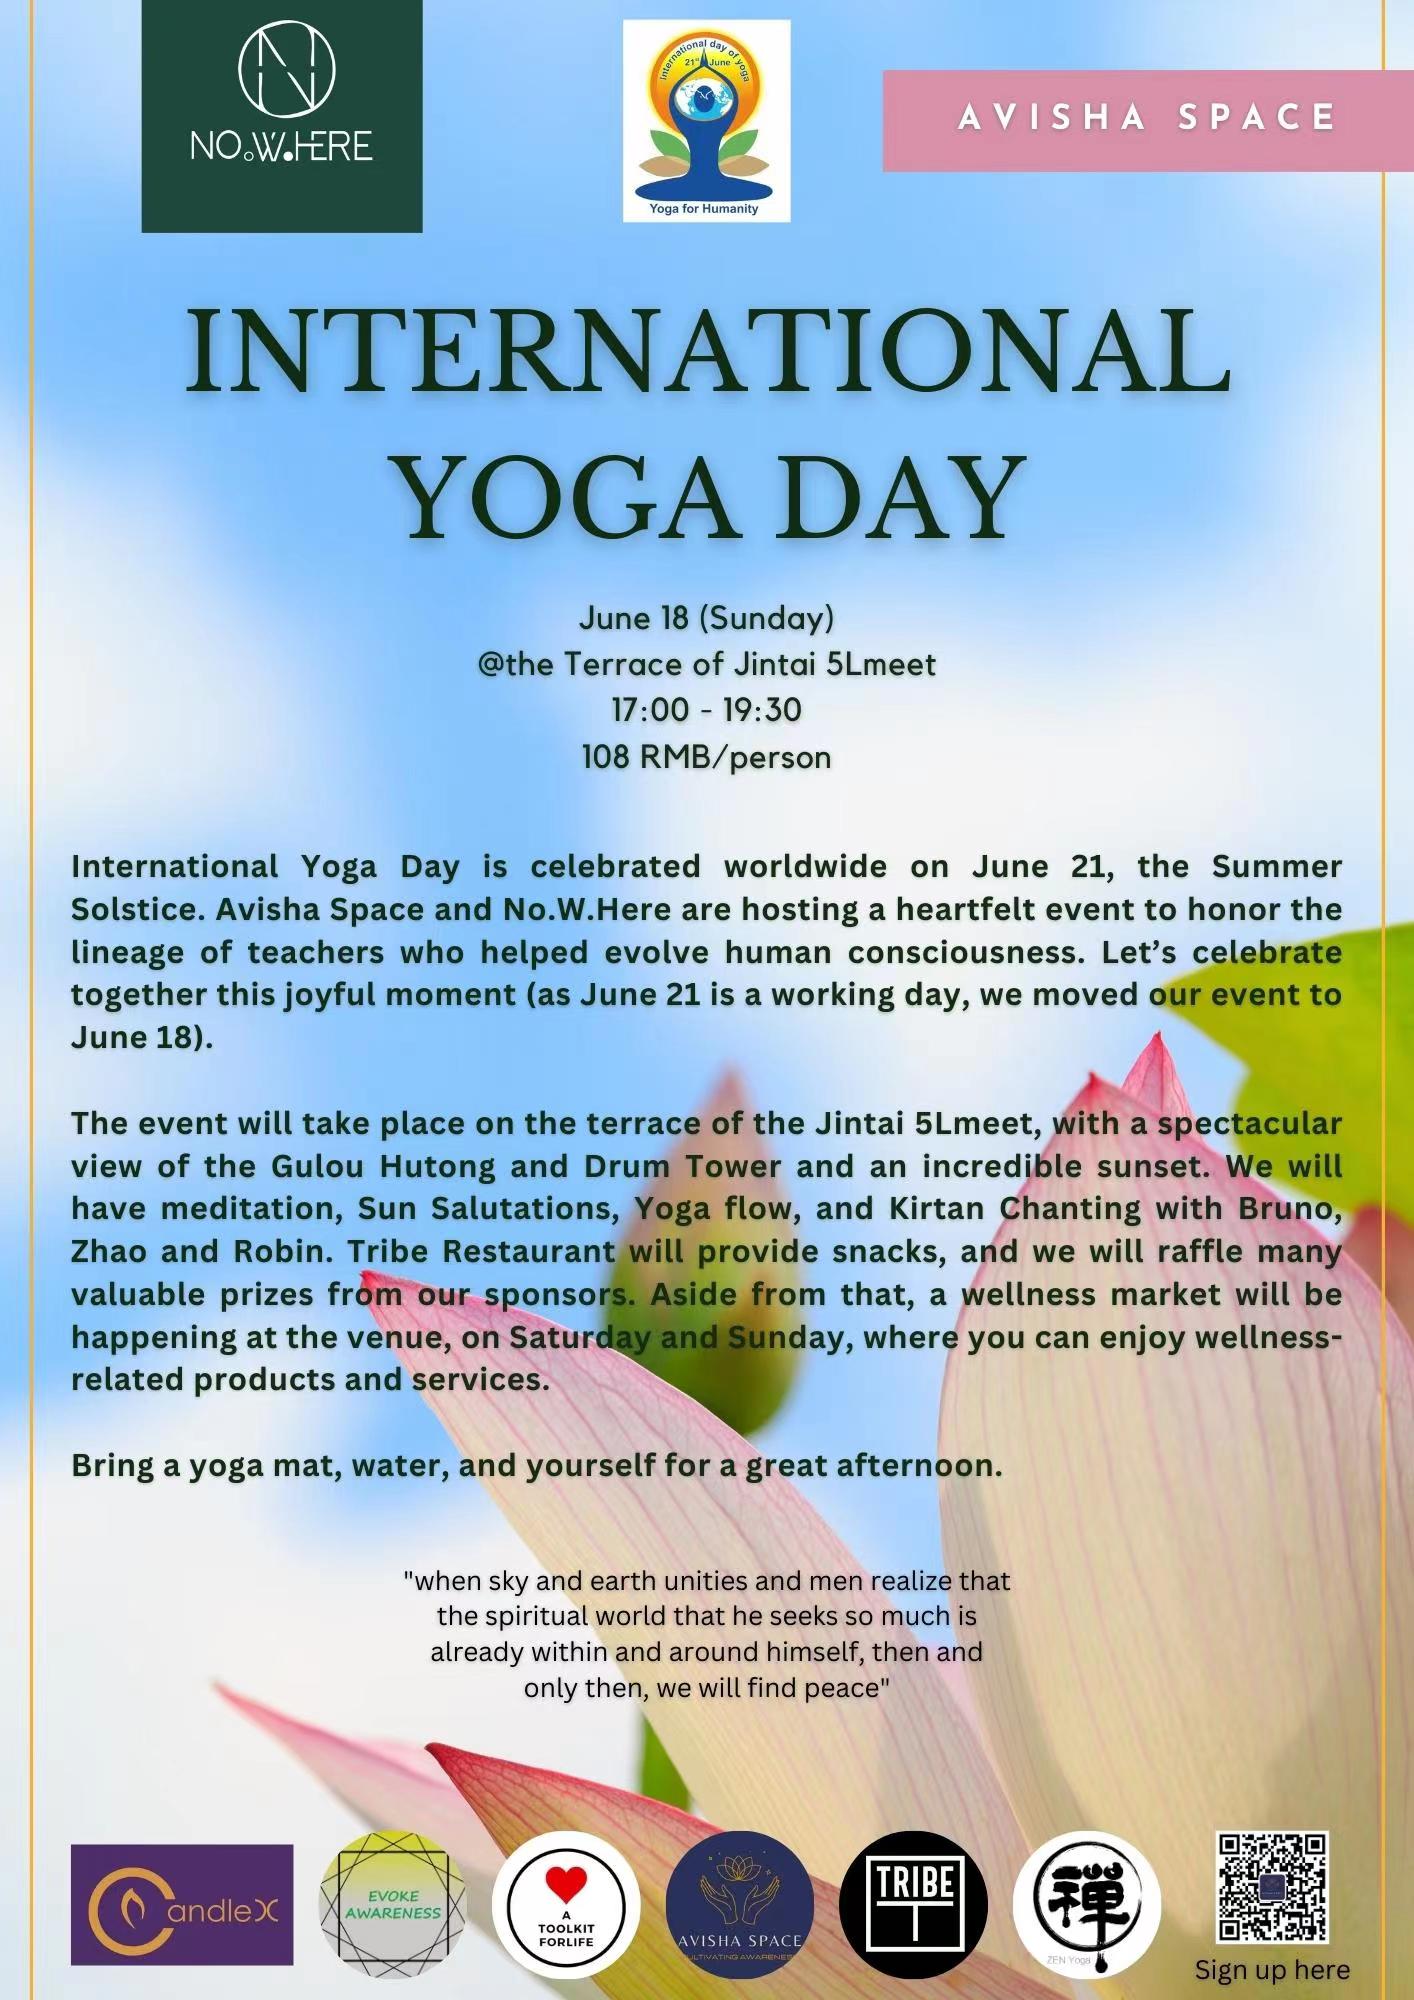 International Yoga Day at The Terrace of Jintai